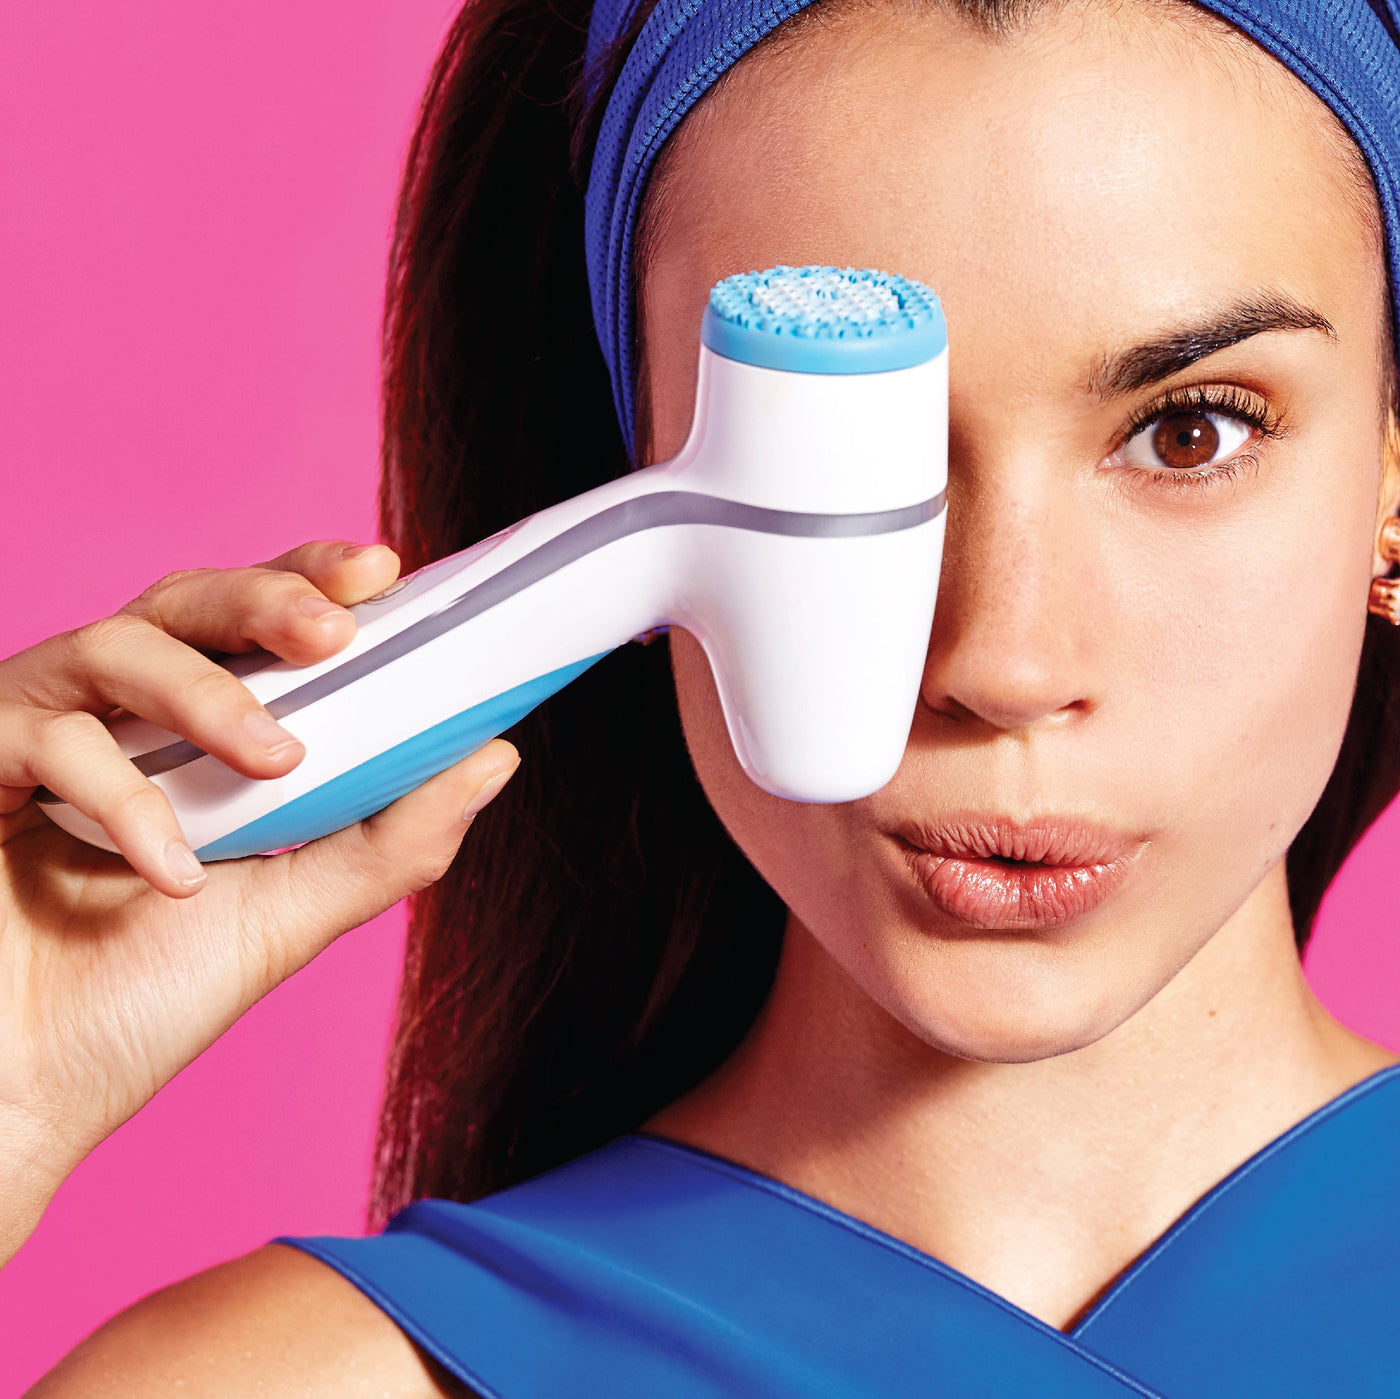 World's #1 in home beauty device!